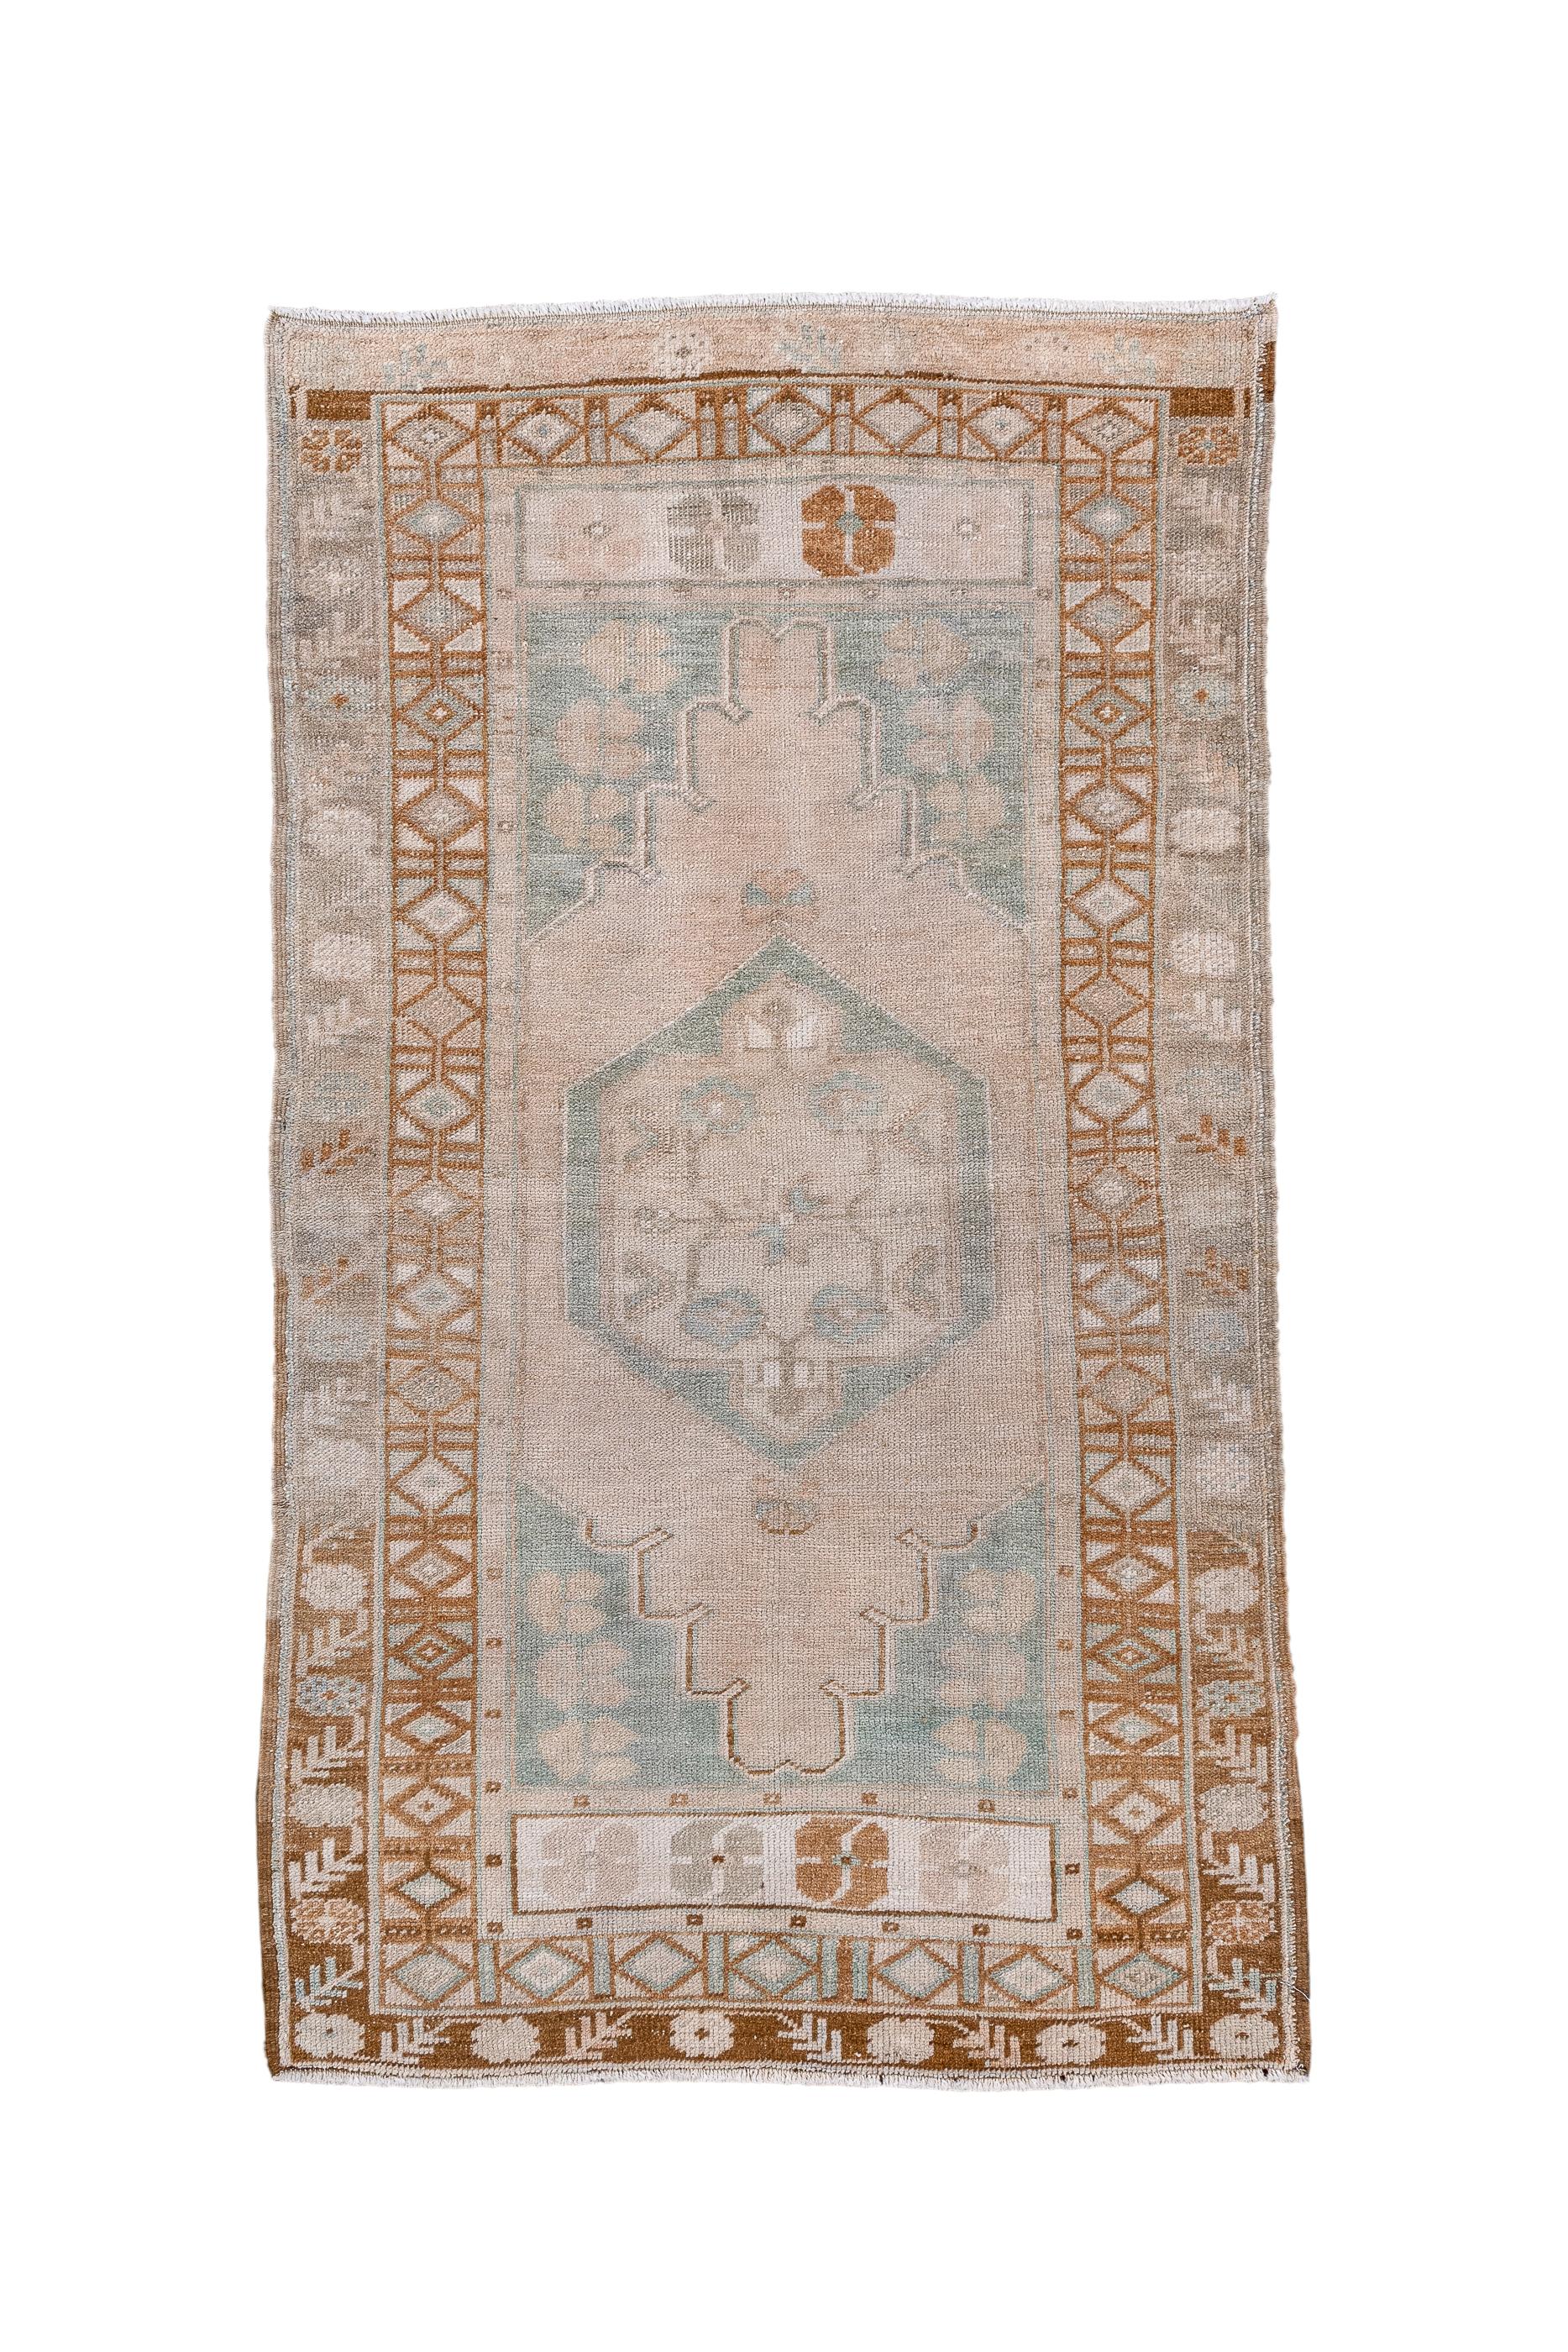 With a softened overall palette, this Anatolian village scatter shows   a very light rust field hosting  shaped corners and a tonally en suite hexagonal medallion enclosing flowers and rosettes. Sienna border outlines rectangles and inner lozenges.